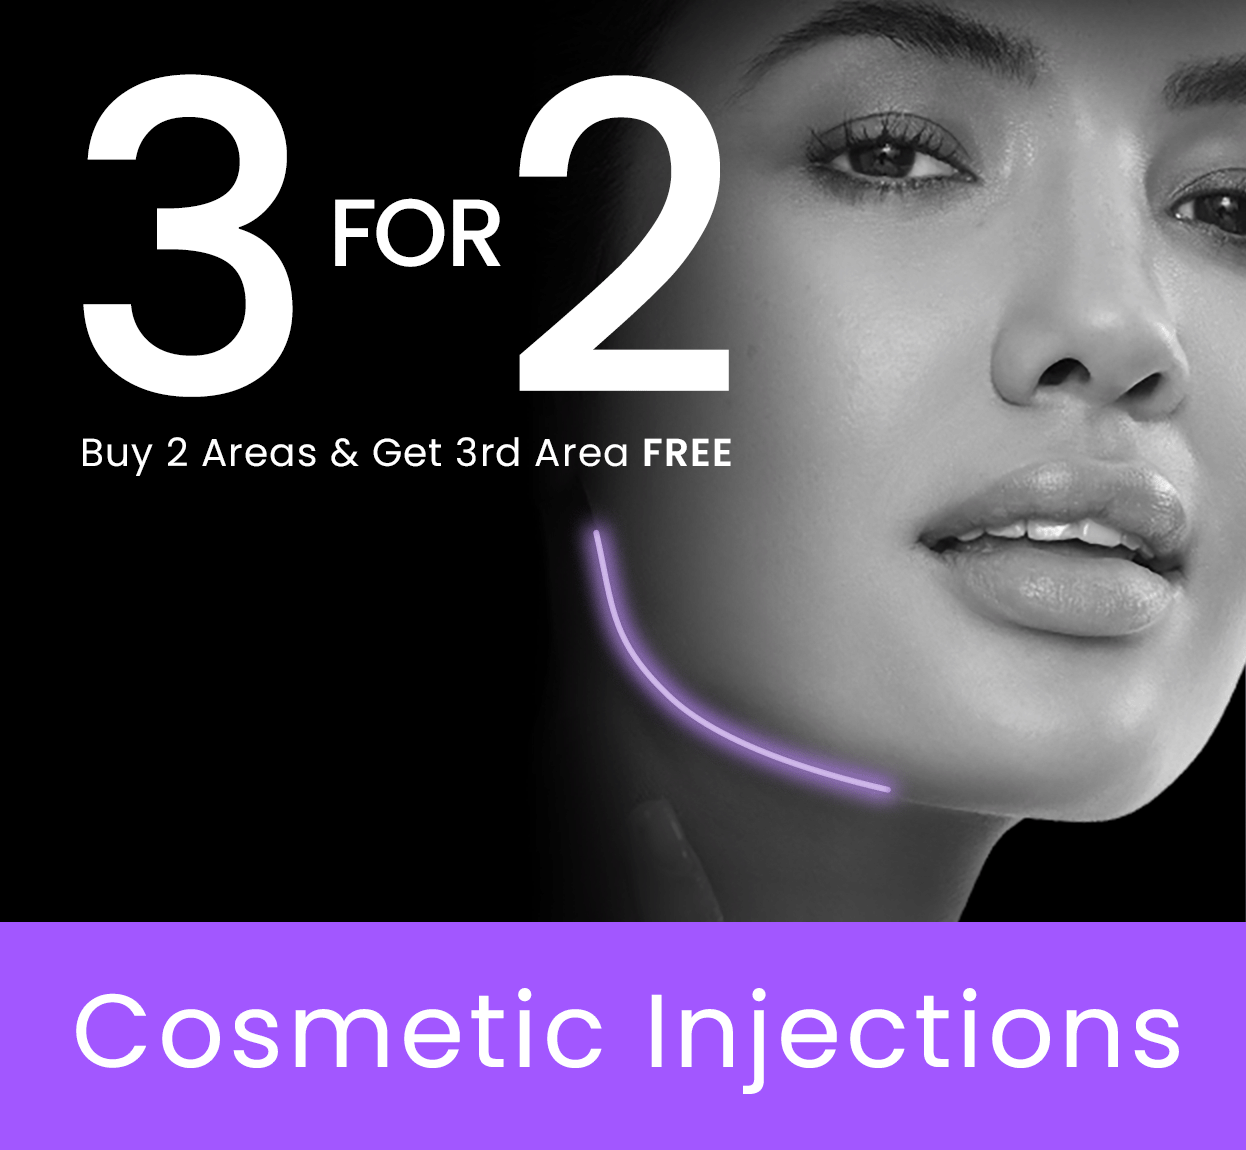 3 For 2 Cosmetic Injections Black Friday Offer